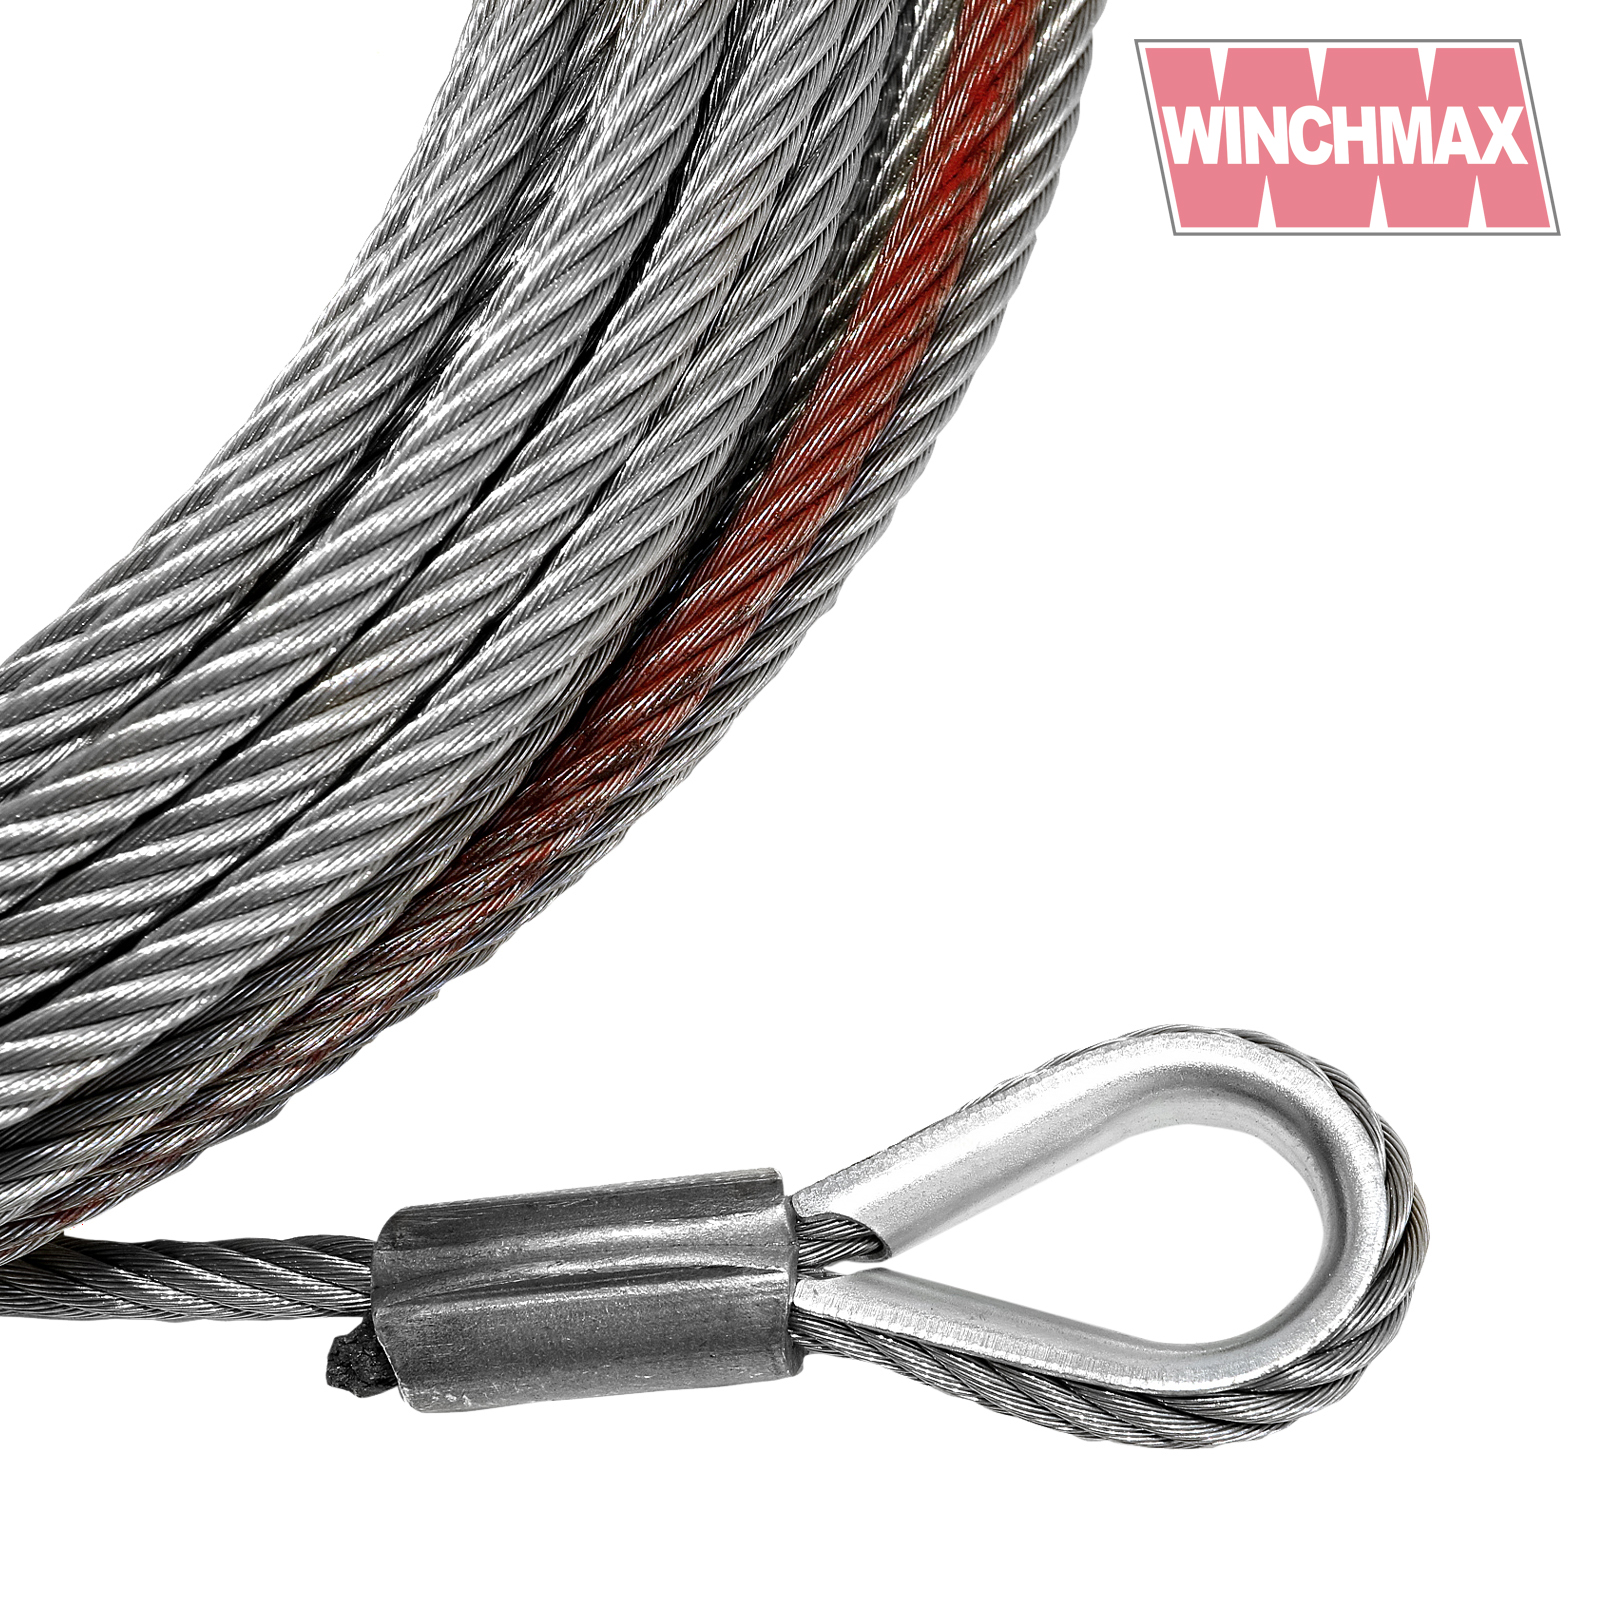 Steel Rope 15m x 9.5mm, Hole Fix. 3/8 inch Clevis Hook. For